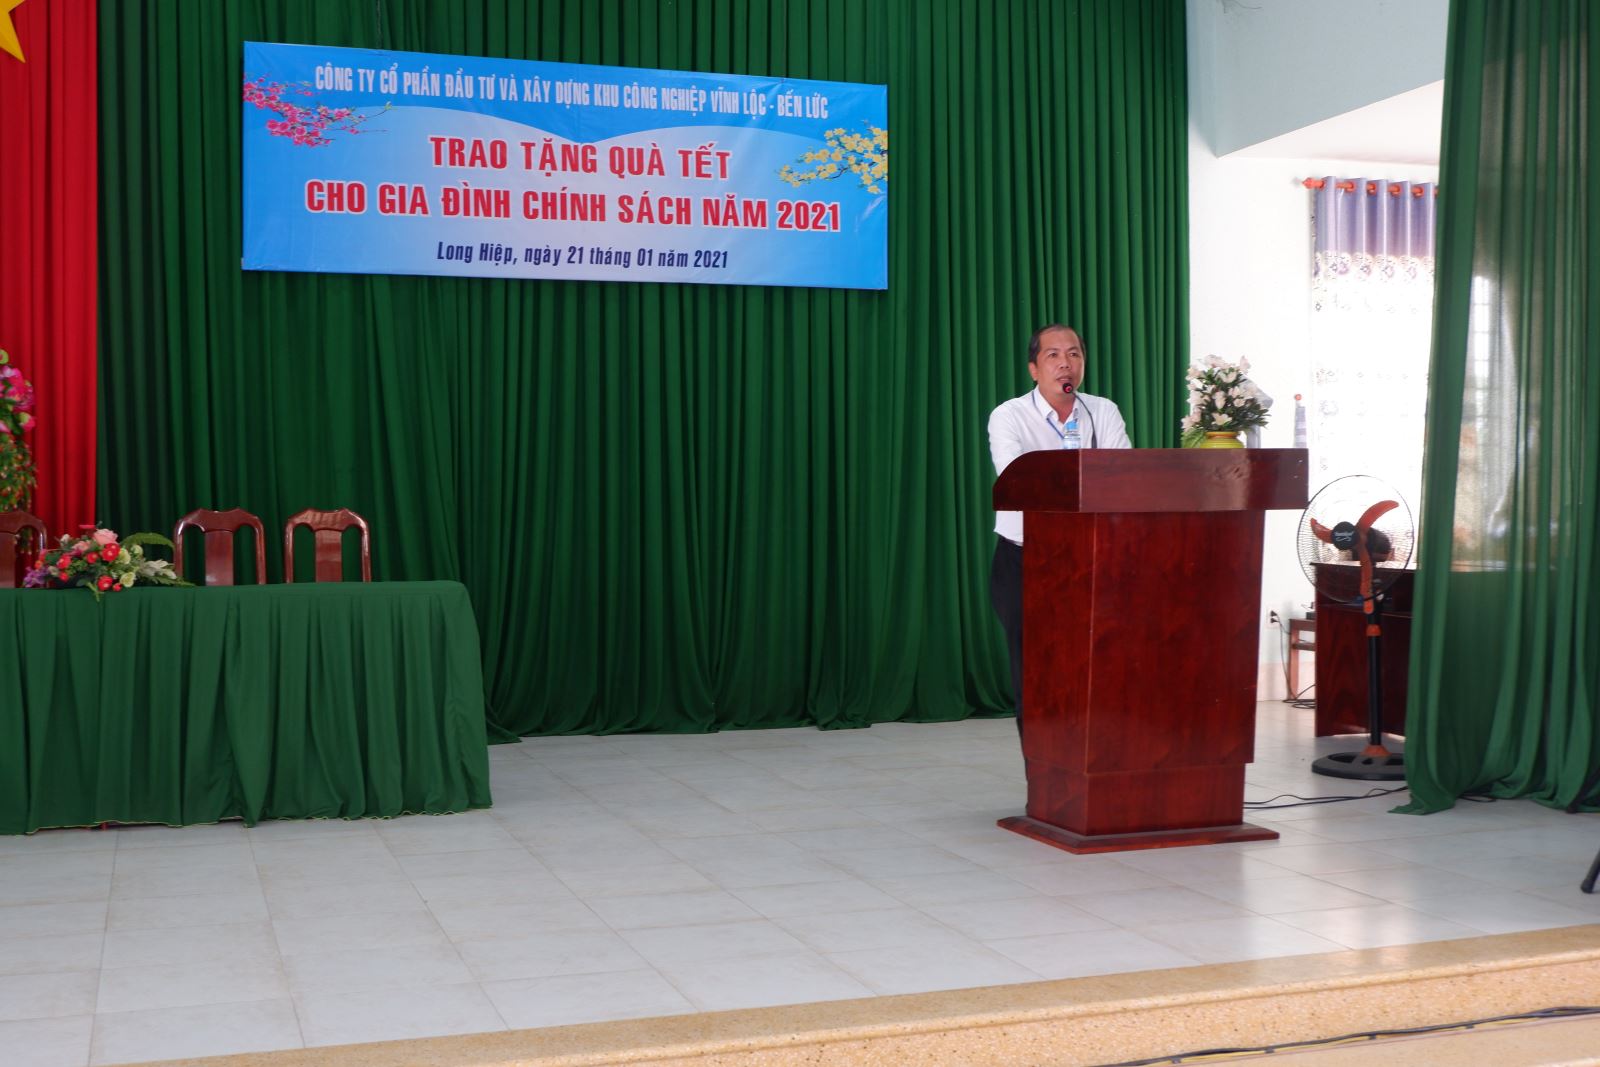 On 21/01/2021, Vinh Loc – Ben Luc Corporation supported 100 gifts and needles for poor households in 3 hamlets of Voi La, Long Binh, Phuoc Tinh, in Long Hiep Commune, Ben Luc, Long An.